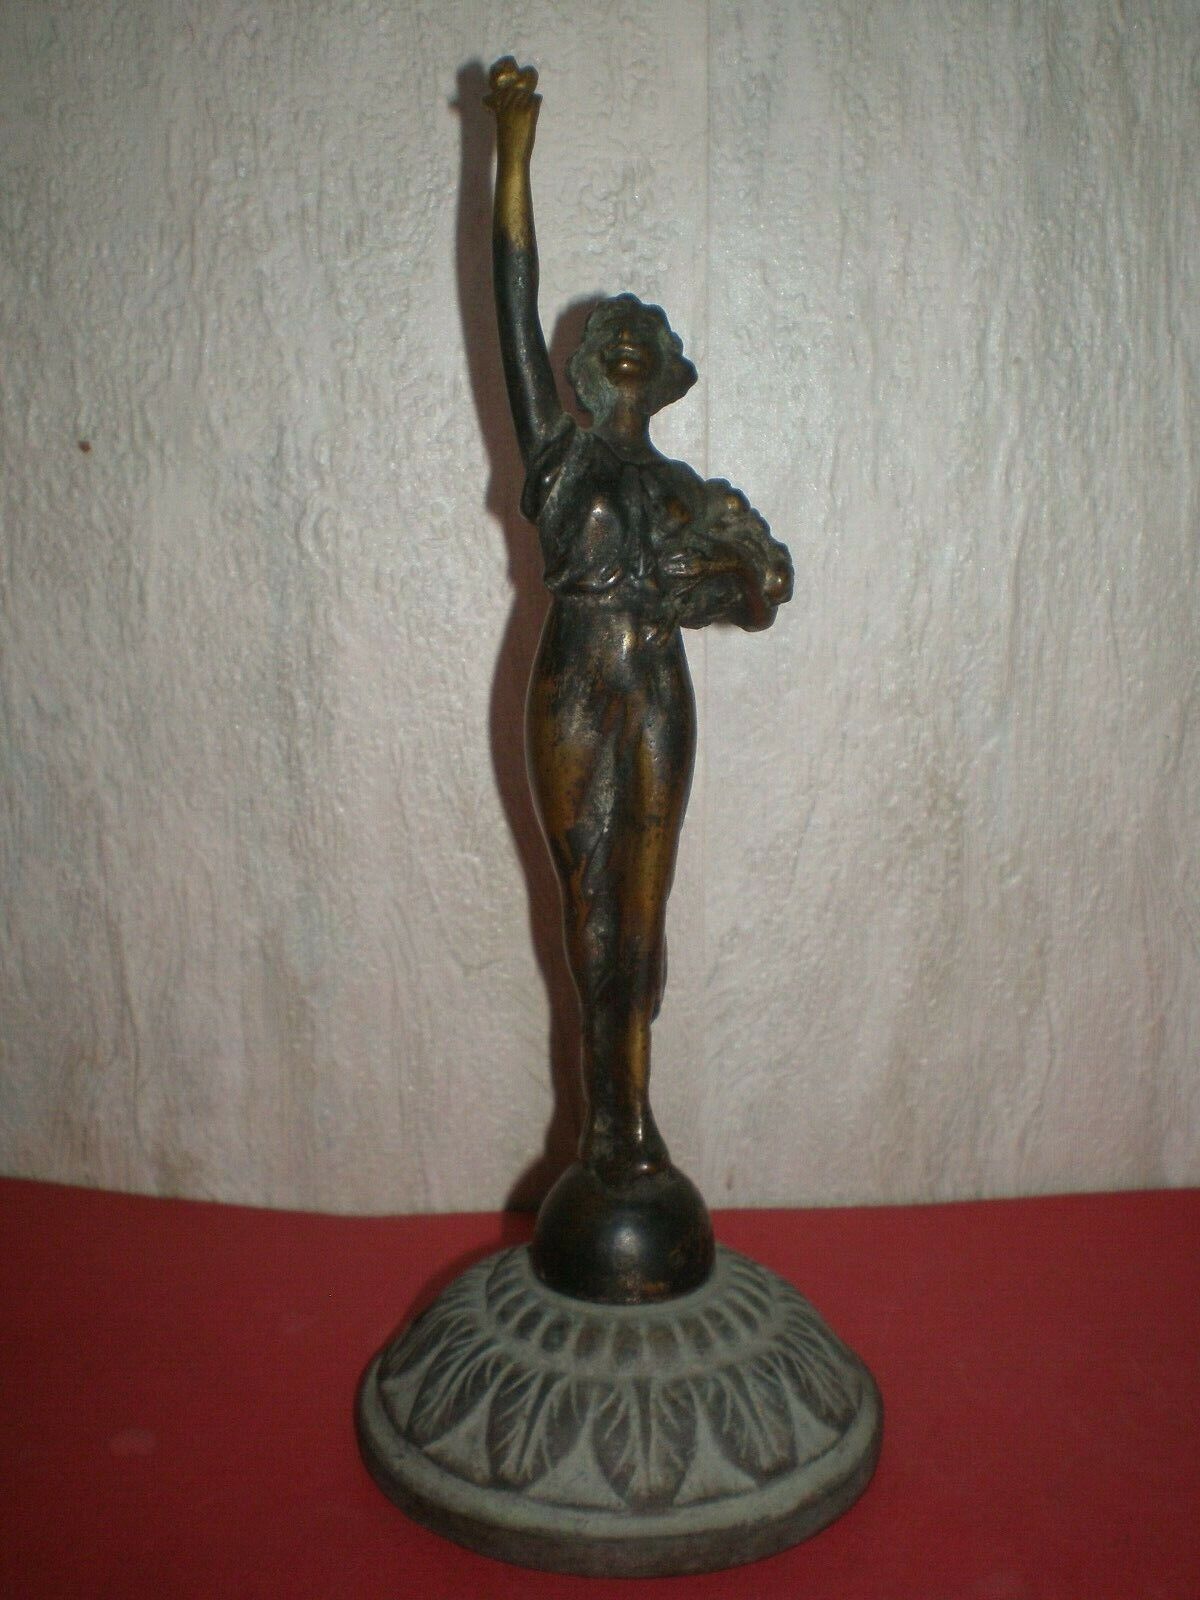 Magnificent old bronze figure of woman mounted on the base - VERY RARE